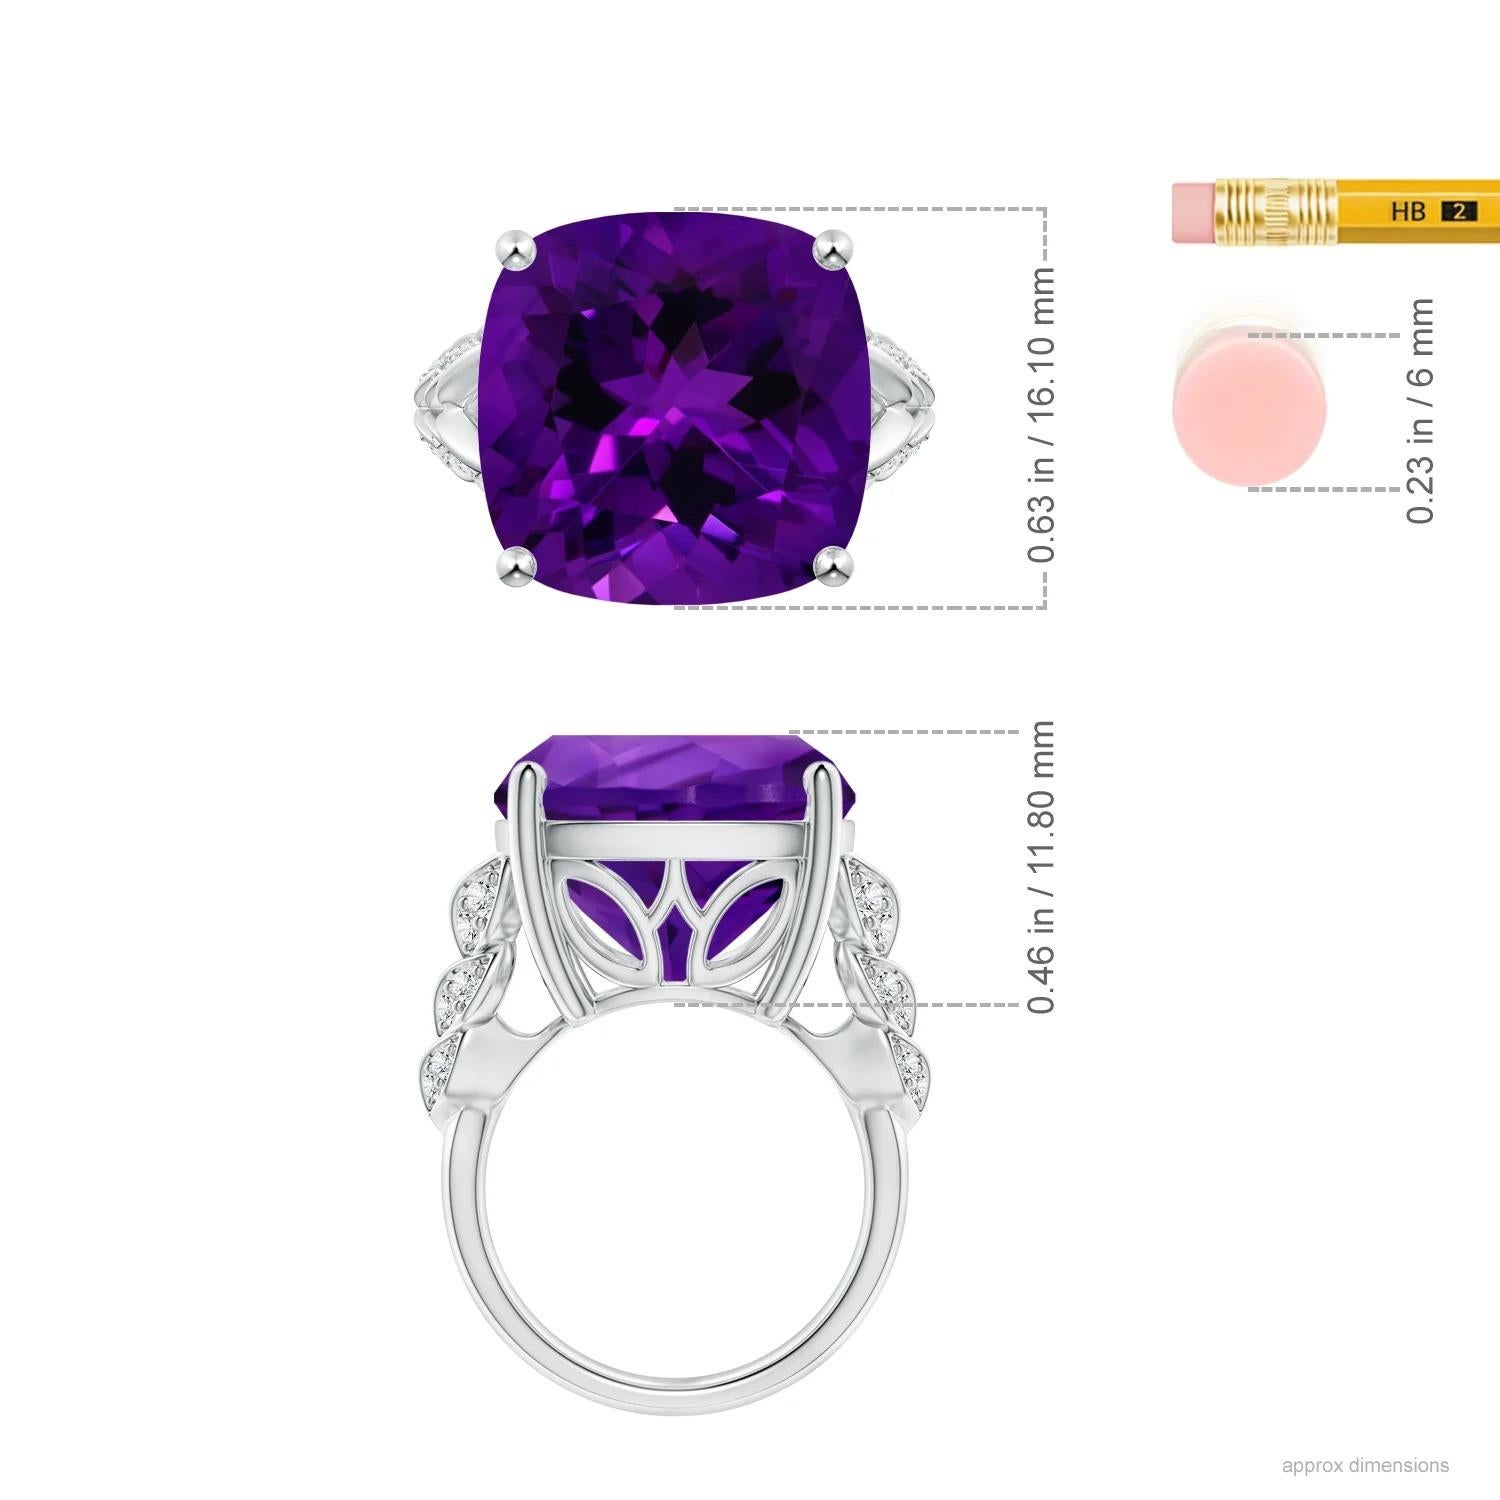 For Sale:  Angara Gia Certified Natural Cushion Amethyst White Gold Ring with Leaf Motifs 5